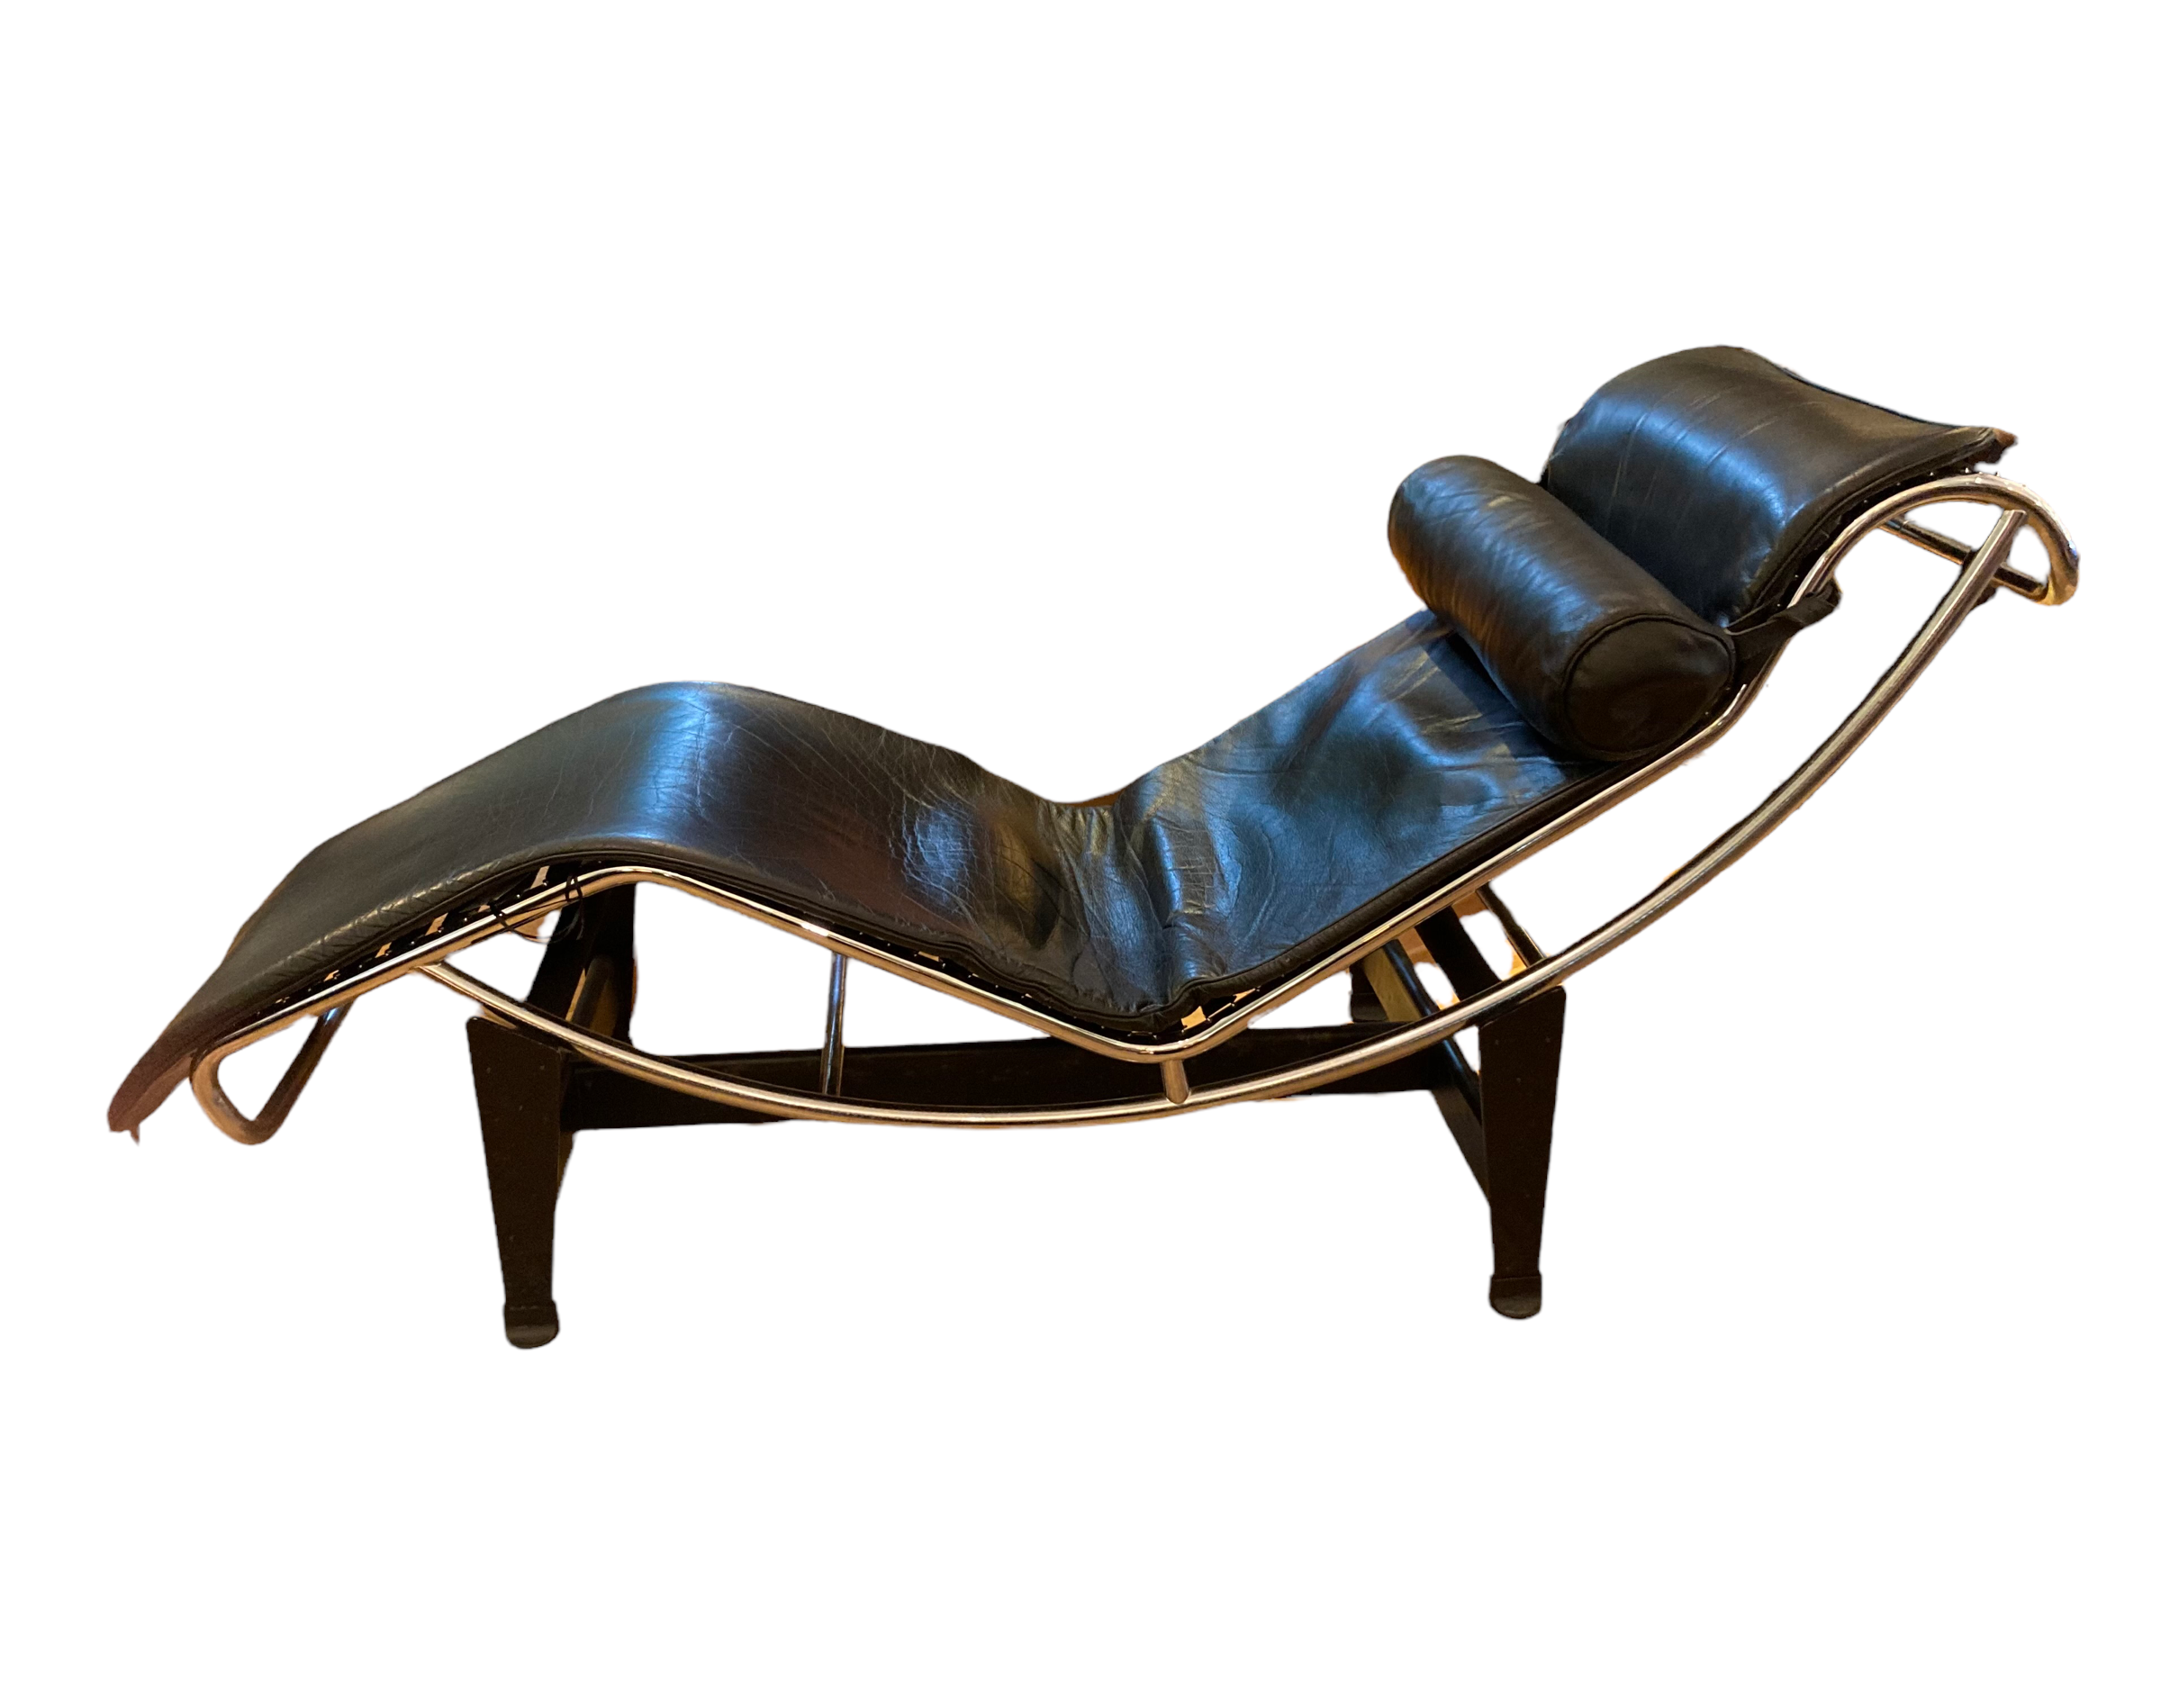 Vintage Le Curbusier Lc4 Chaise by Cassina